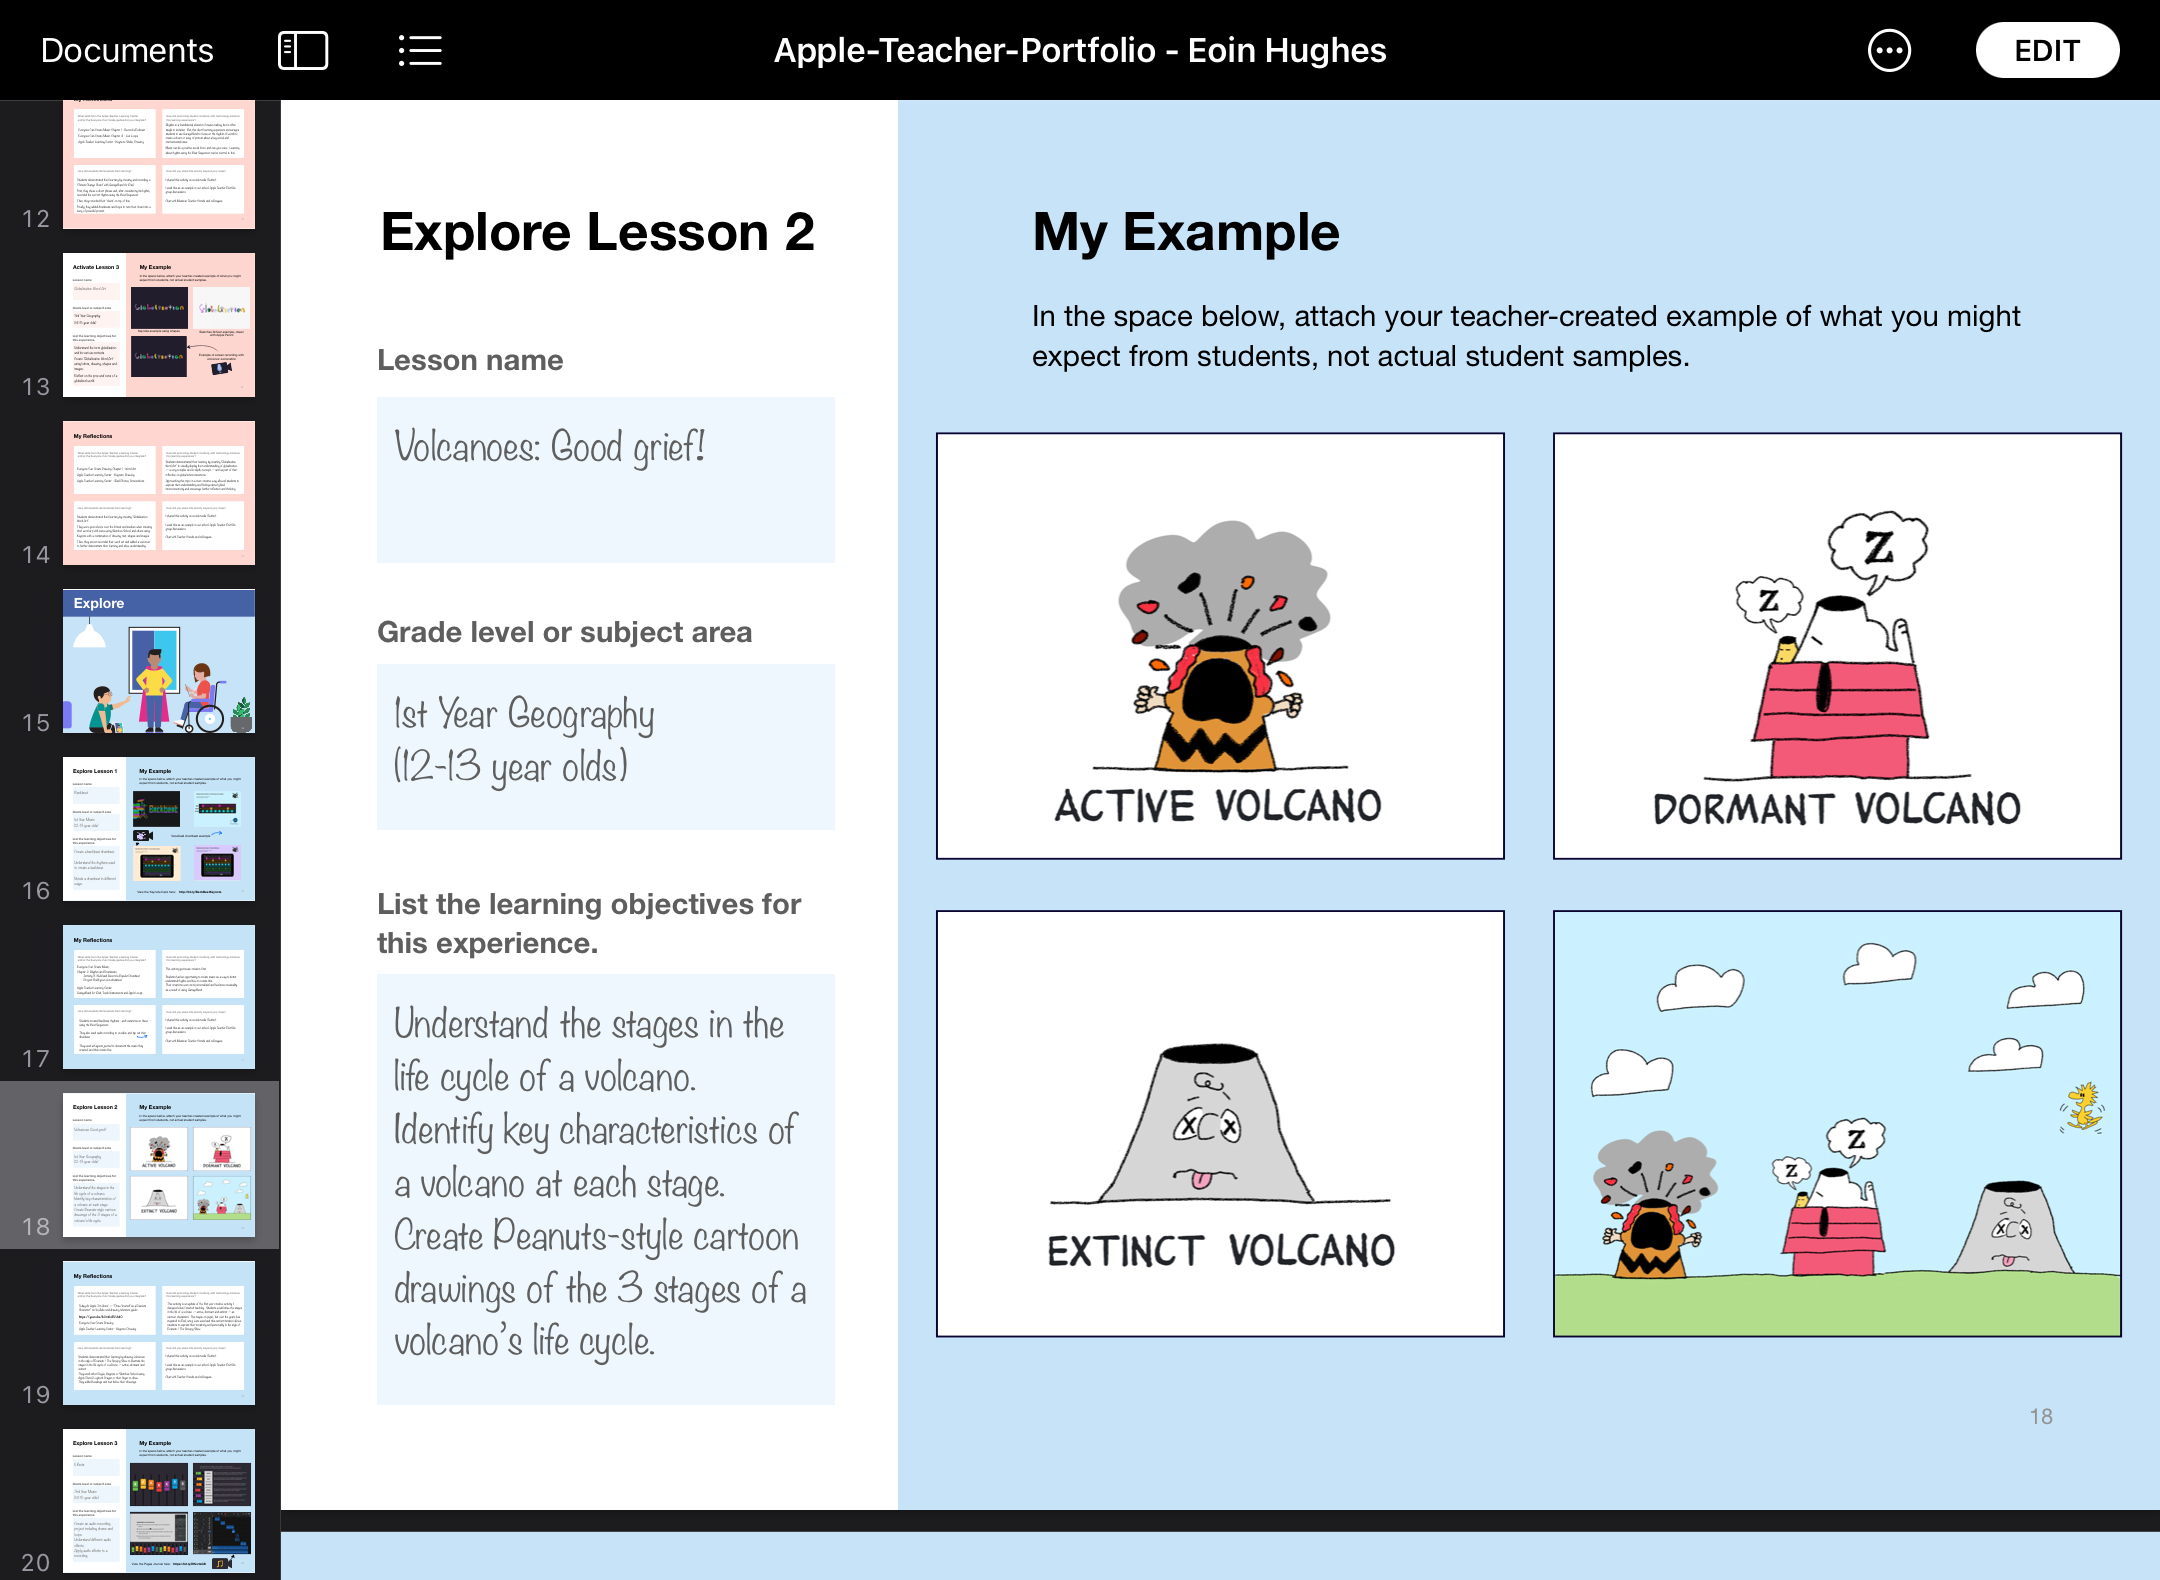 Apple Teacher Portfolio Explore lesson 2 screenshot. Includes the lesson name, learning objectives & lesson example images. 